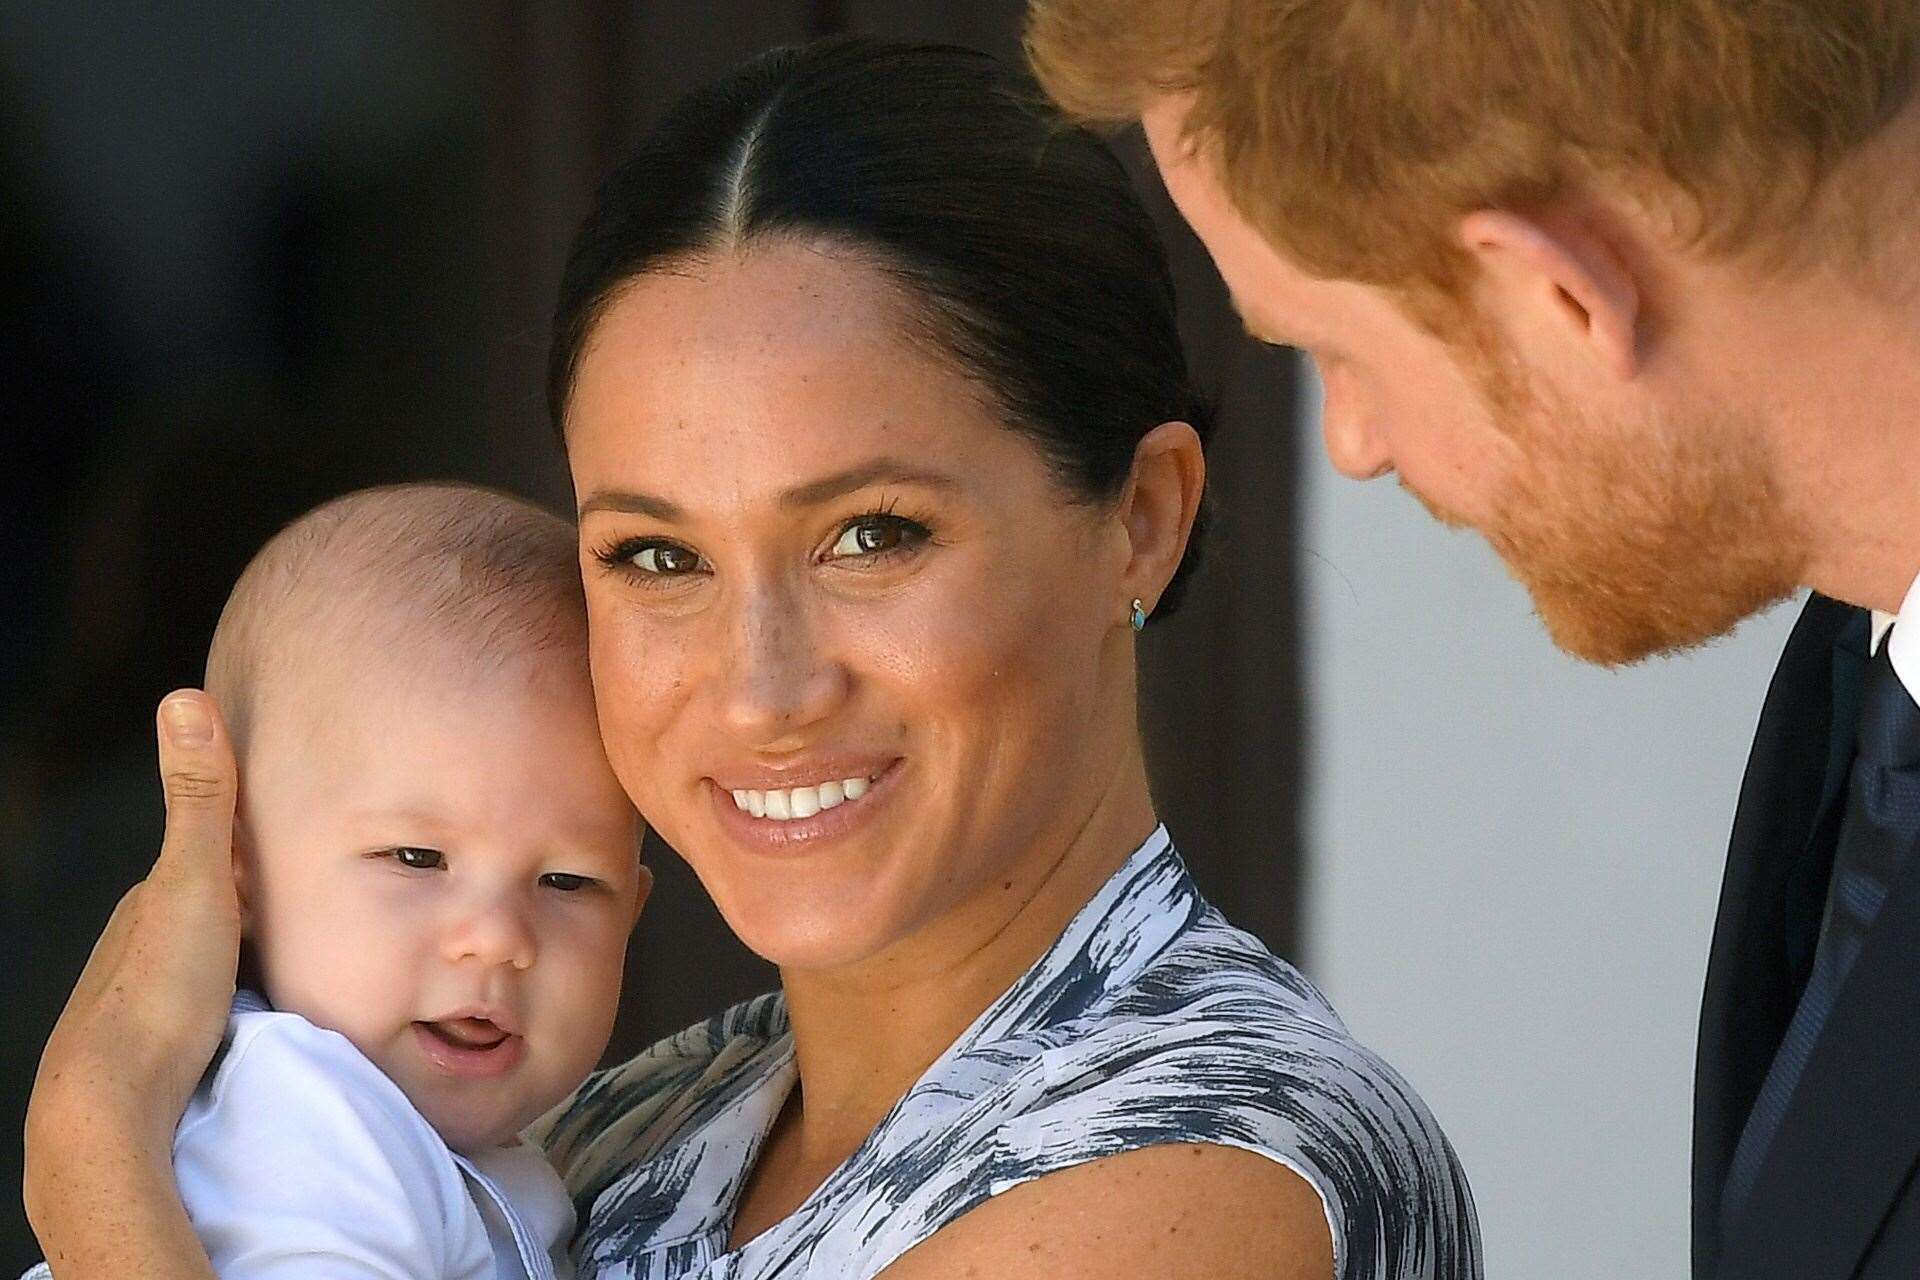 Meghan and Harry moved to America last year with son Archie and now have daughter Lili (Toby Melville/PA)